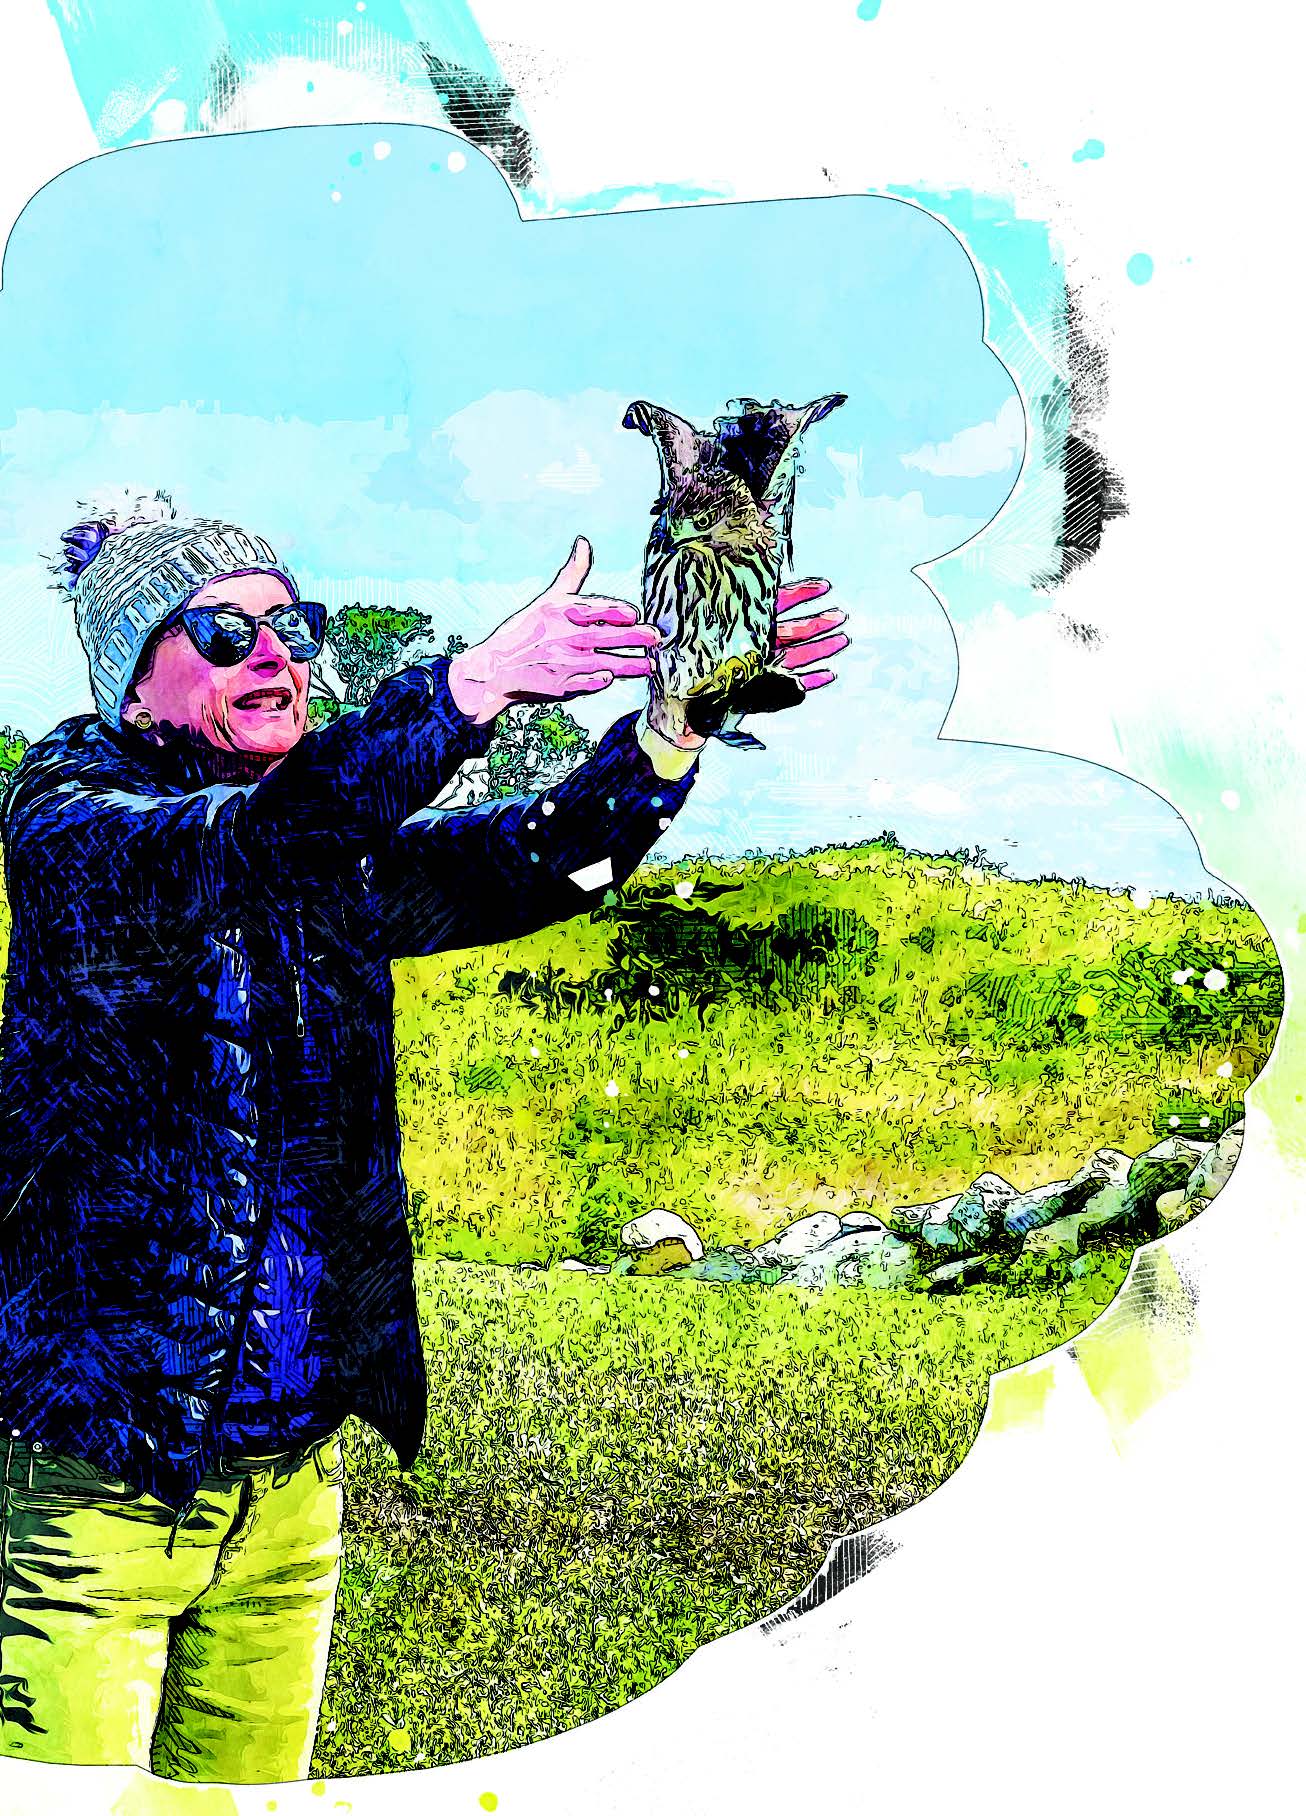 An artistic rendering features a person with a hat releasing a bird into nature.